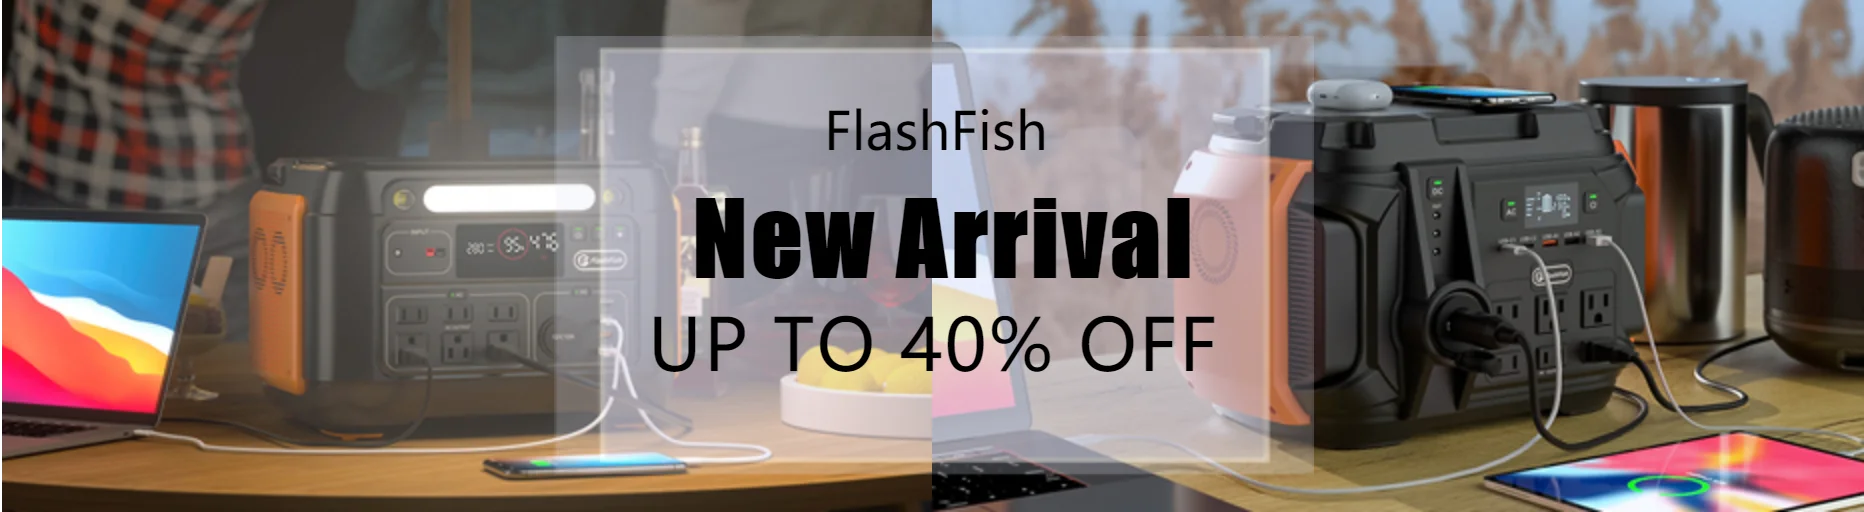 Introduce FlashFish's new arrival with up to 40% off, limited time offer.